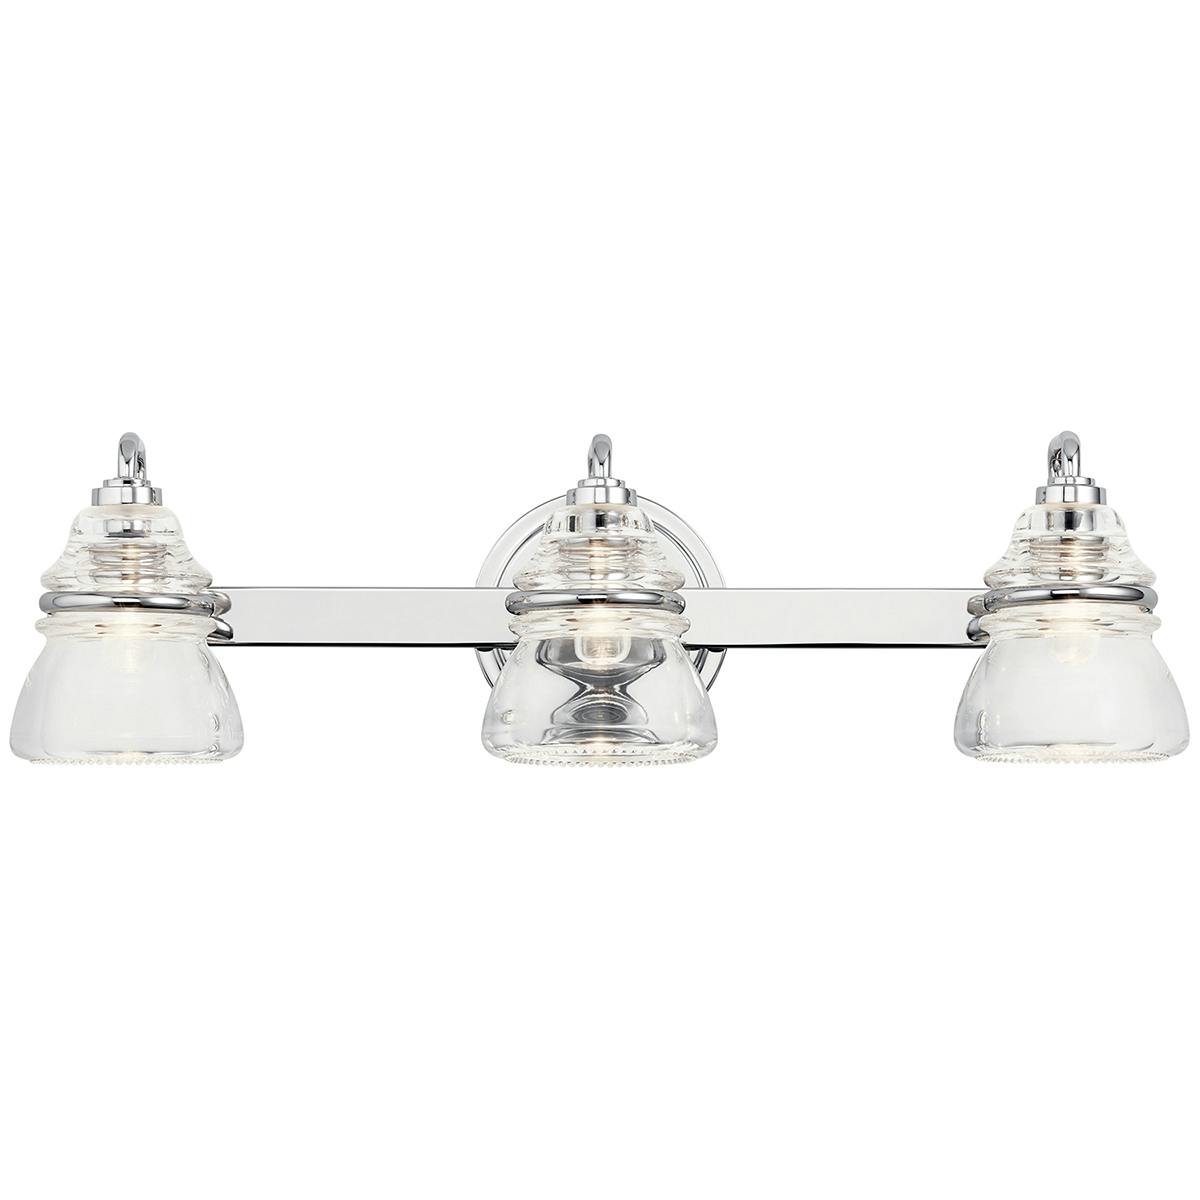 Front view of the Talland 3 Light Vanity Light Chrome on a white background